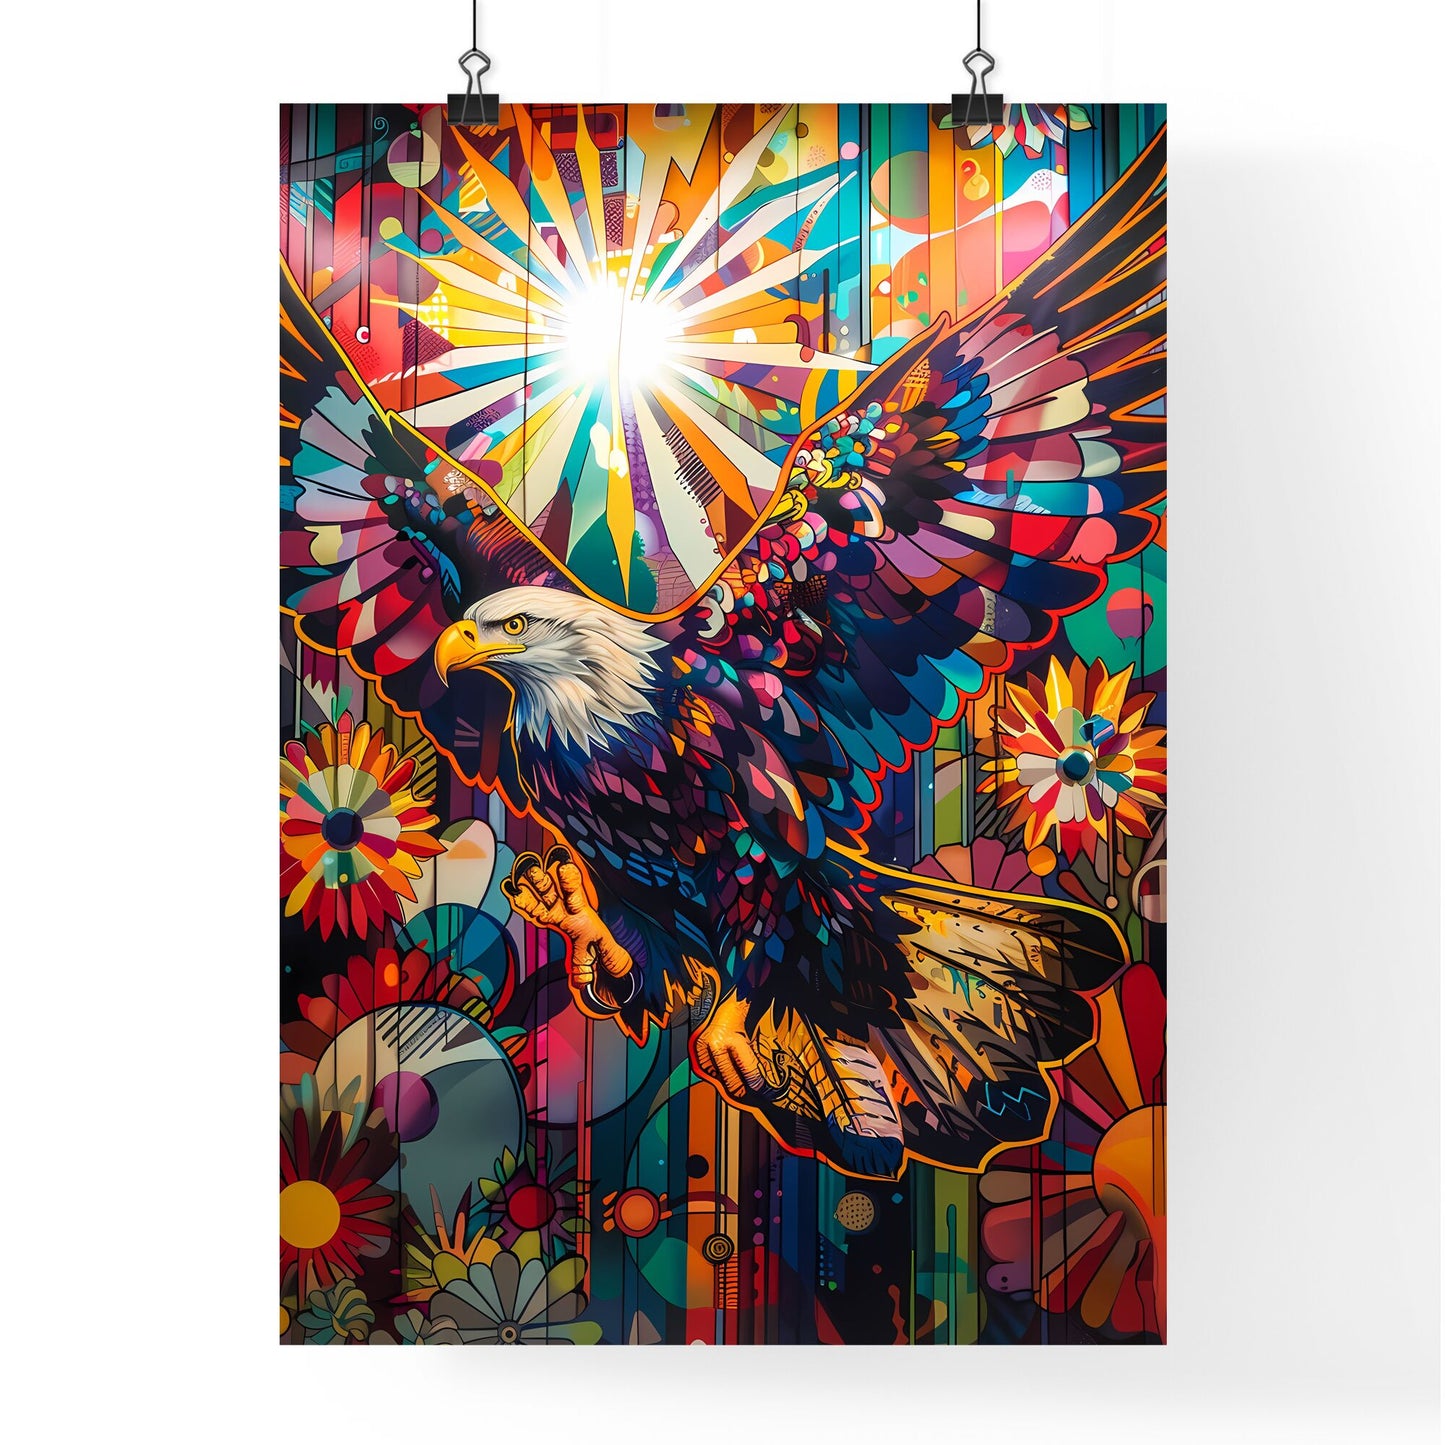 Psychedelic Eagle Painting: Vibrant Pop Art Deco Graffiti Over Stained Glass Landscape Default Title